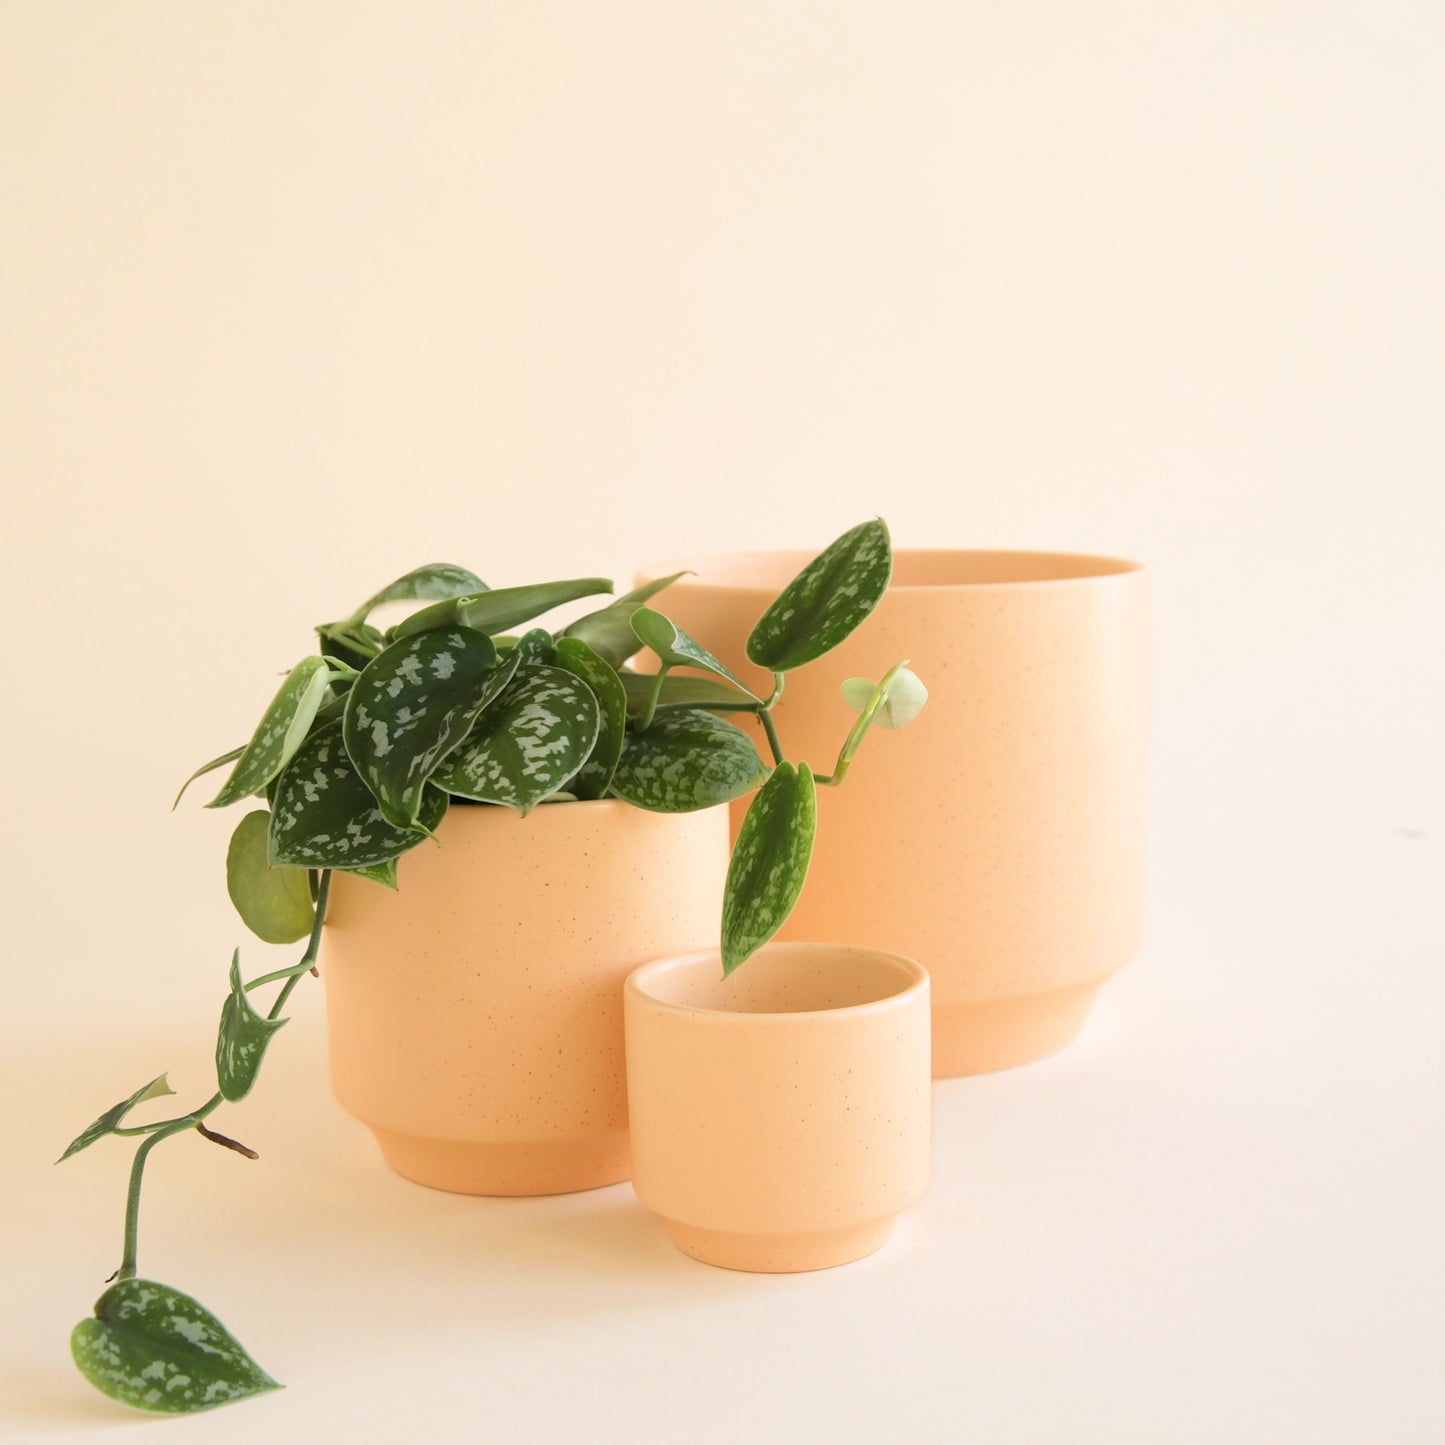 On an ivory background is three different sized ceramic planters in a salmon, pinkish orange shade with a speckle detail and a tapered base.